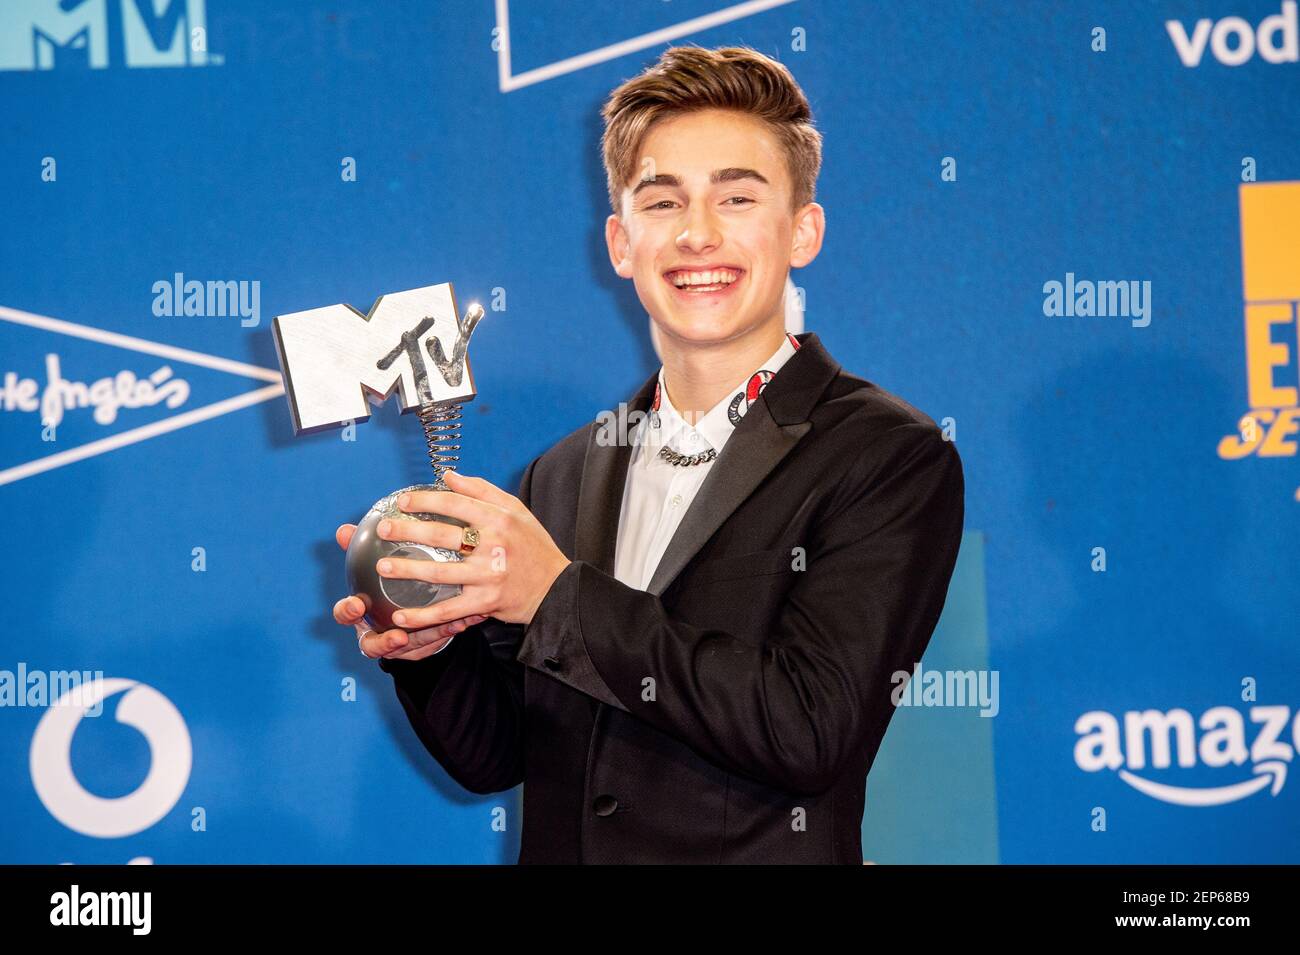 Johnny Orlando in the Winners Room during the MTV European Music Awards 2019 (MTV EMAs) at the FIBES Conference and Exhibition Centre in Seville, Andalusia, Spain